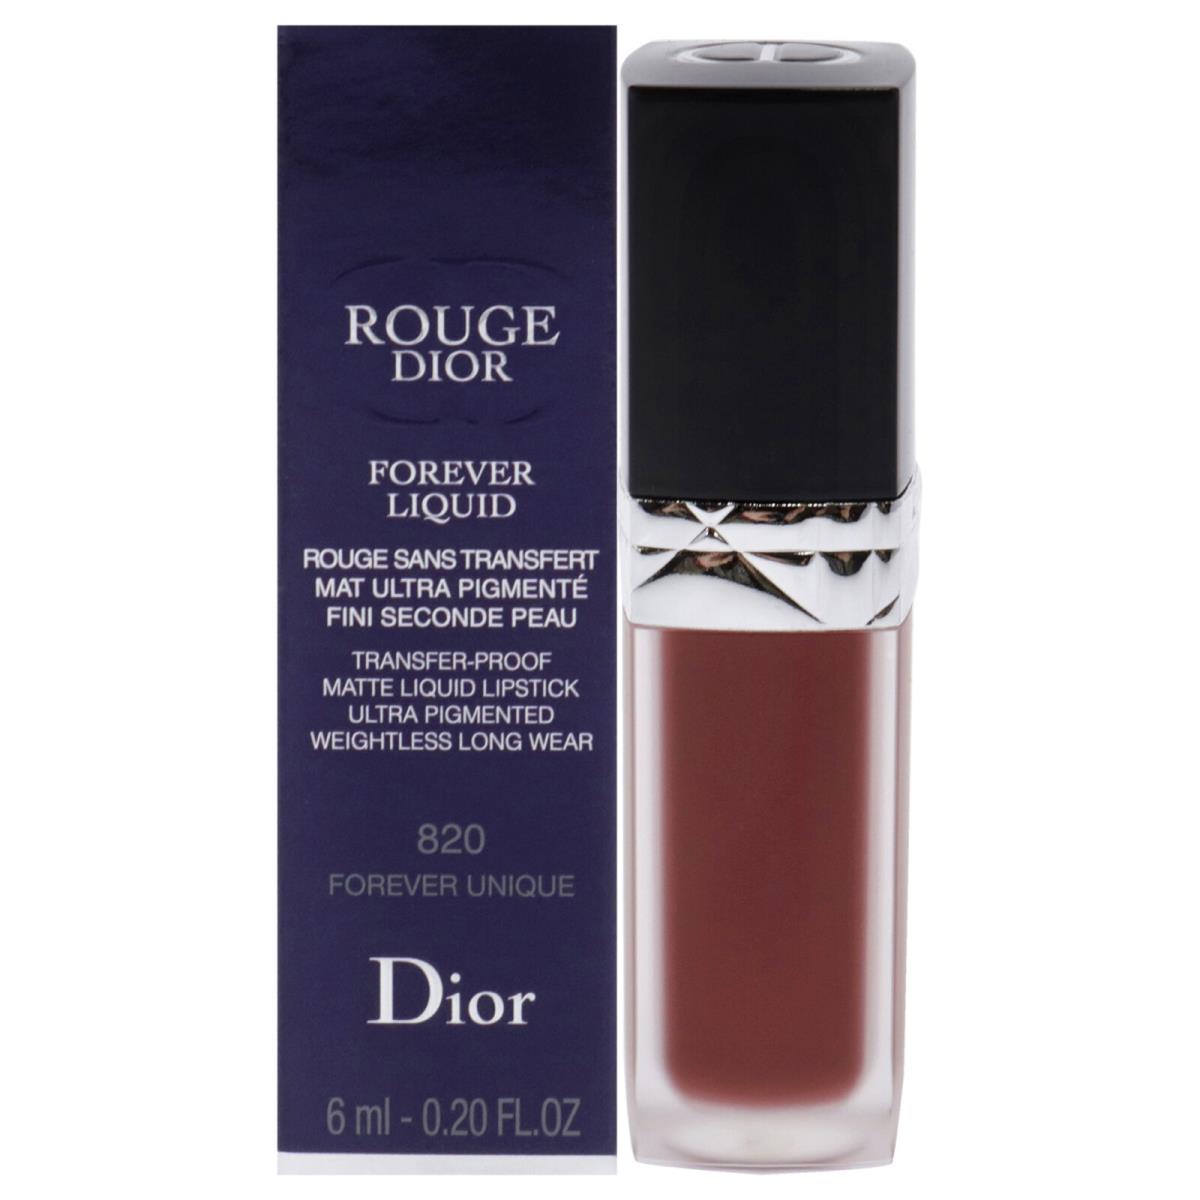 Rouge Dior Forever Liquid Matte - 820 Forever Unique by Christian Dior - 0.20 oz